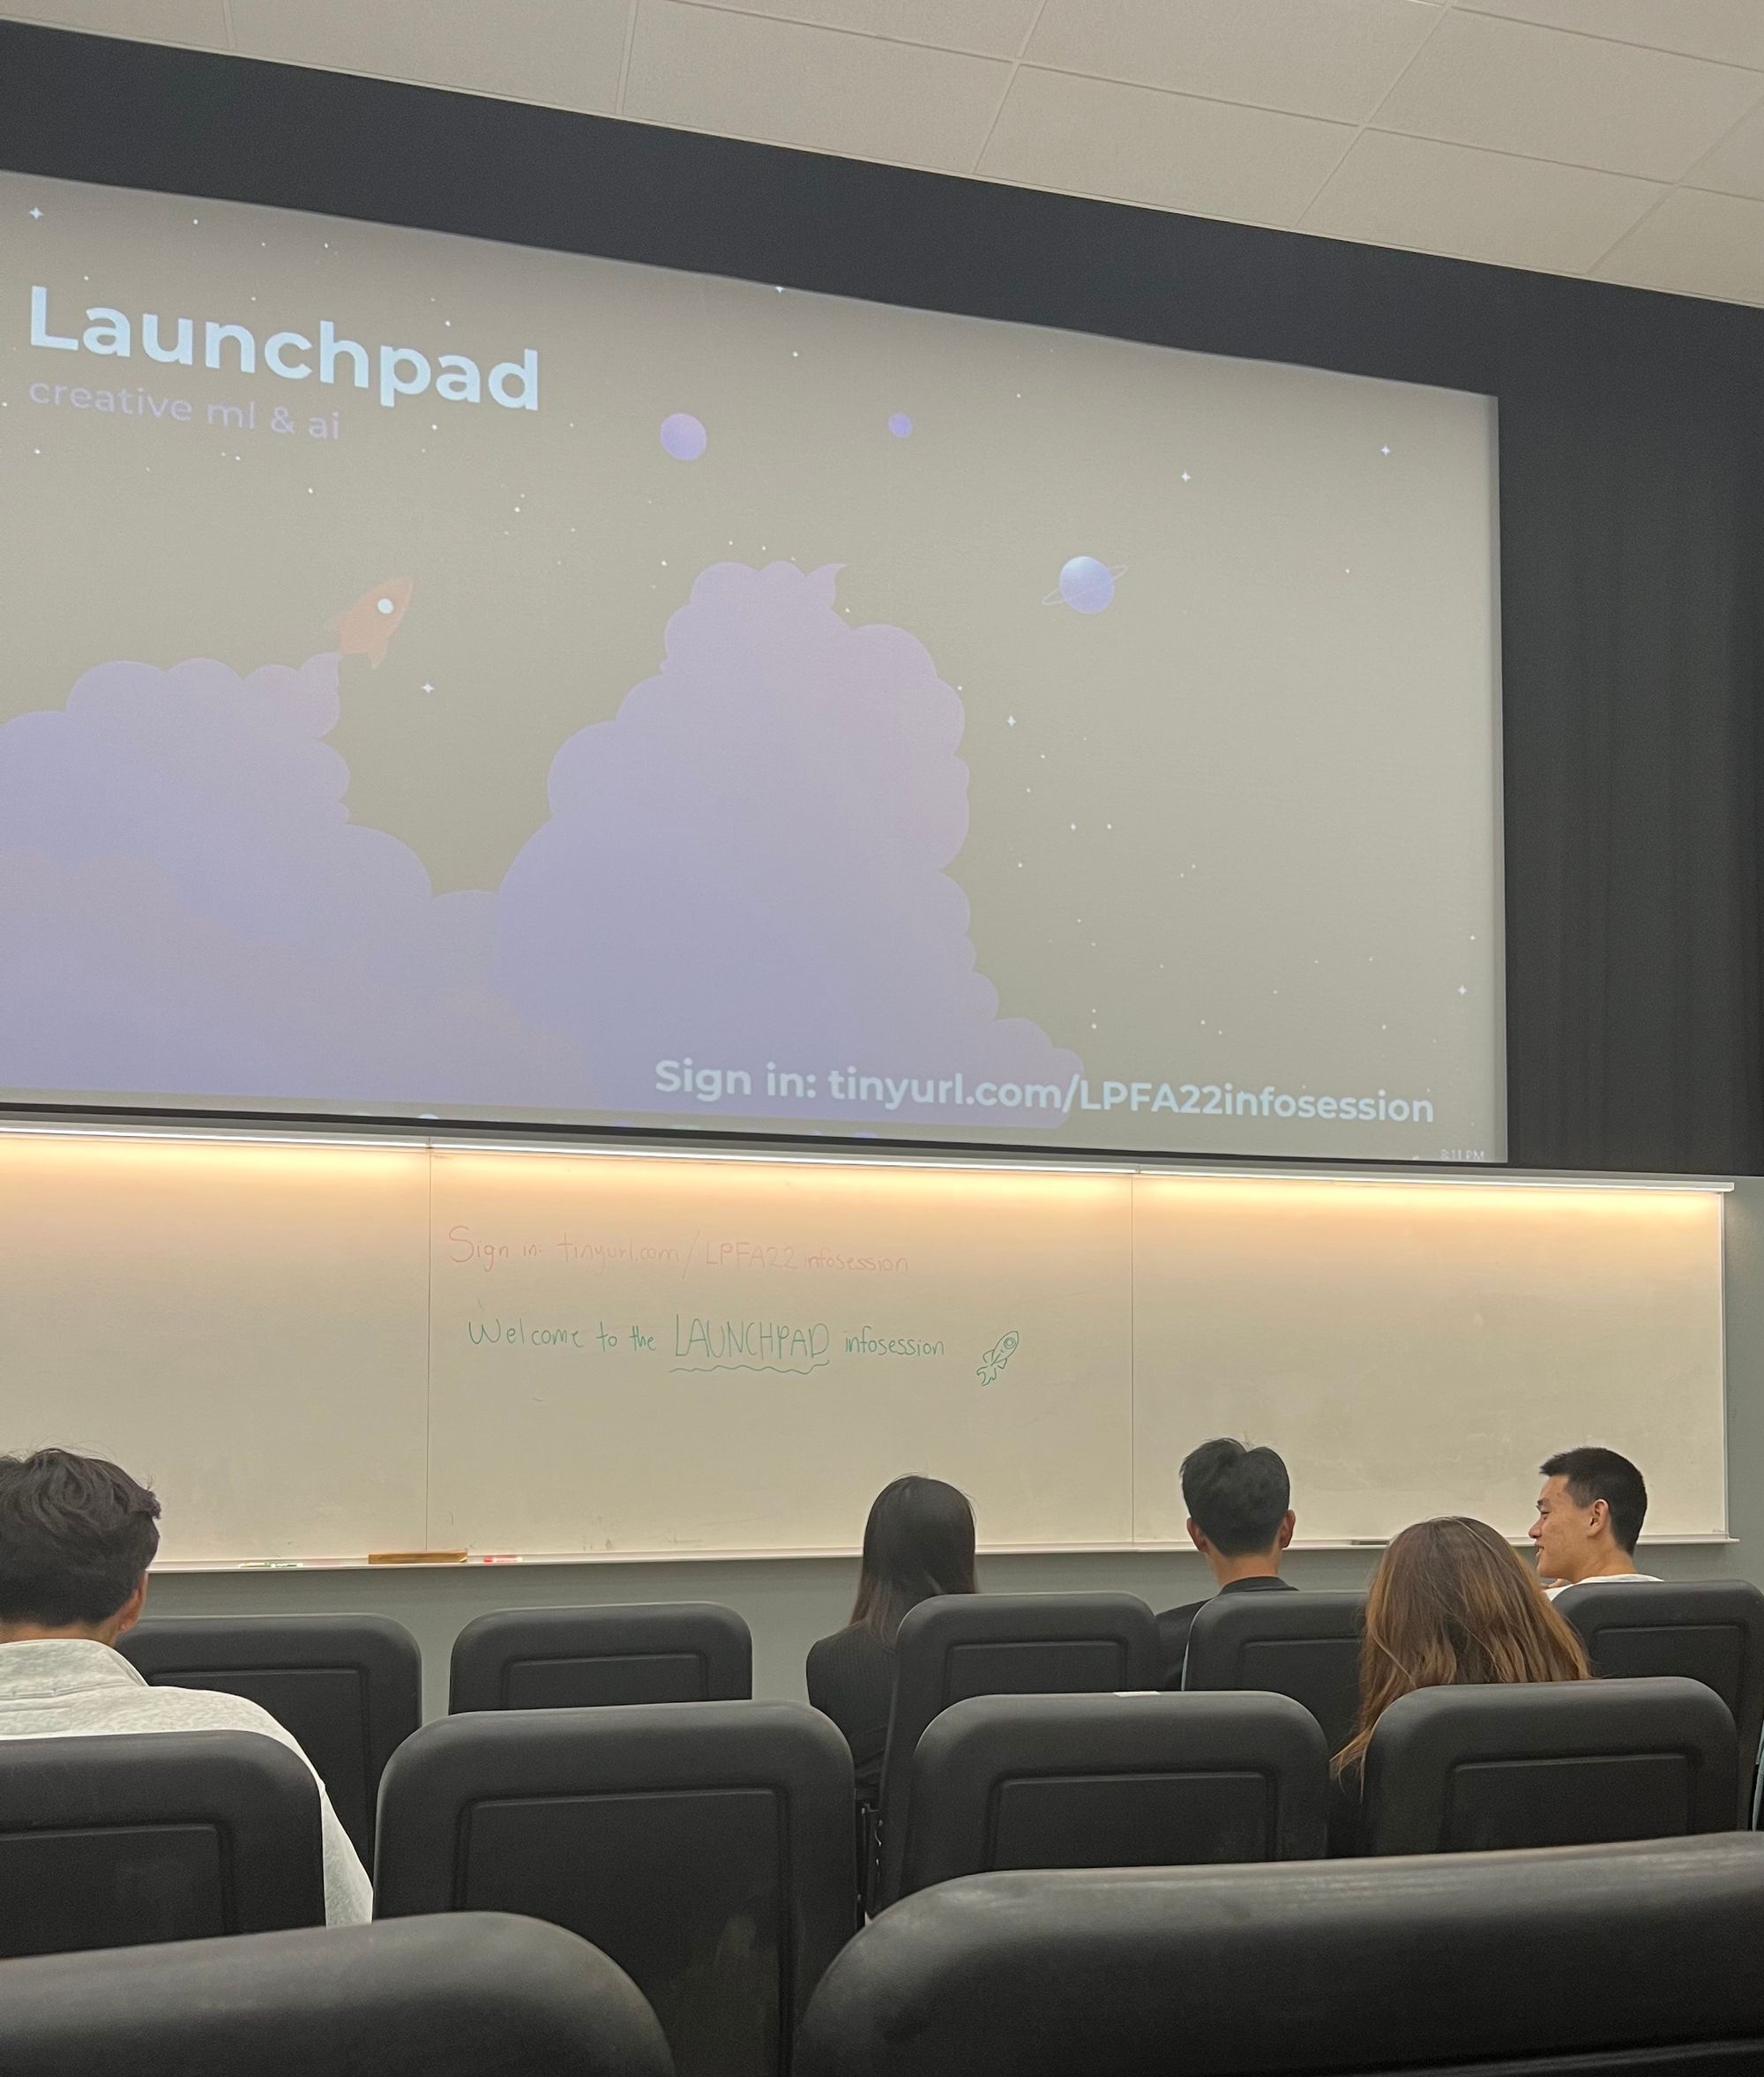 A picture I took from the first infosession for my club, Launchpad